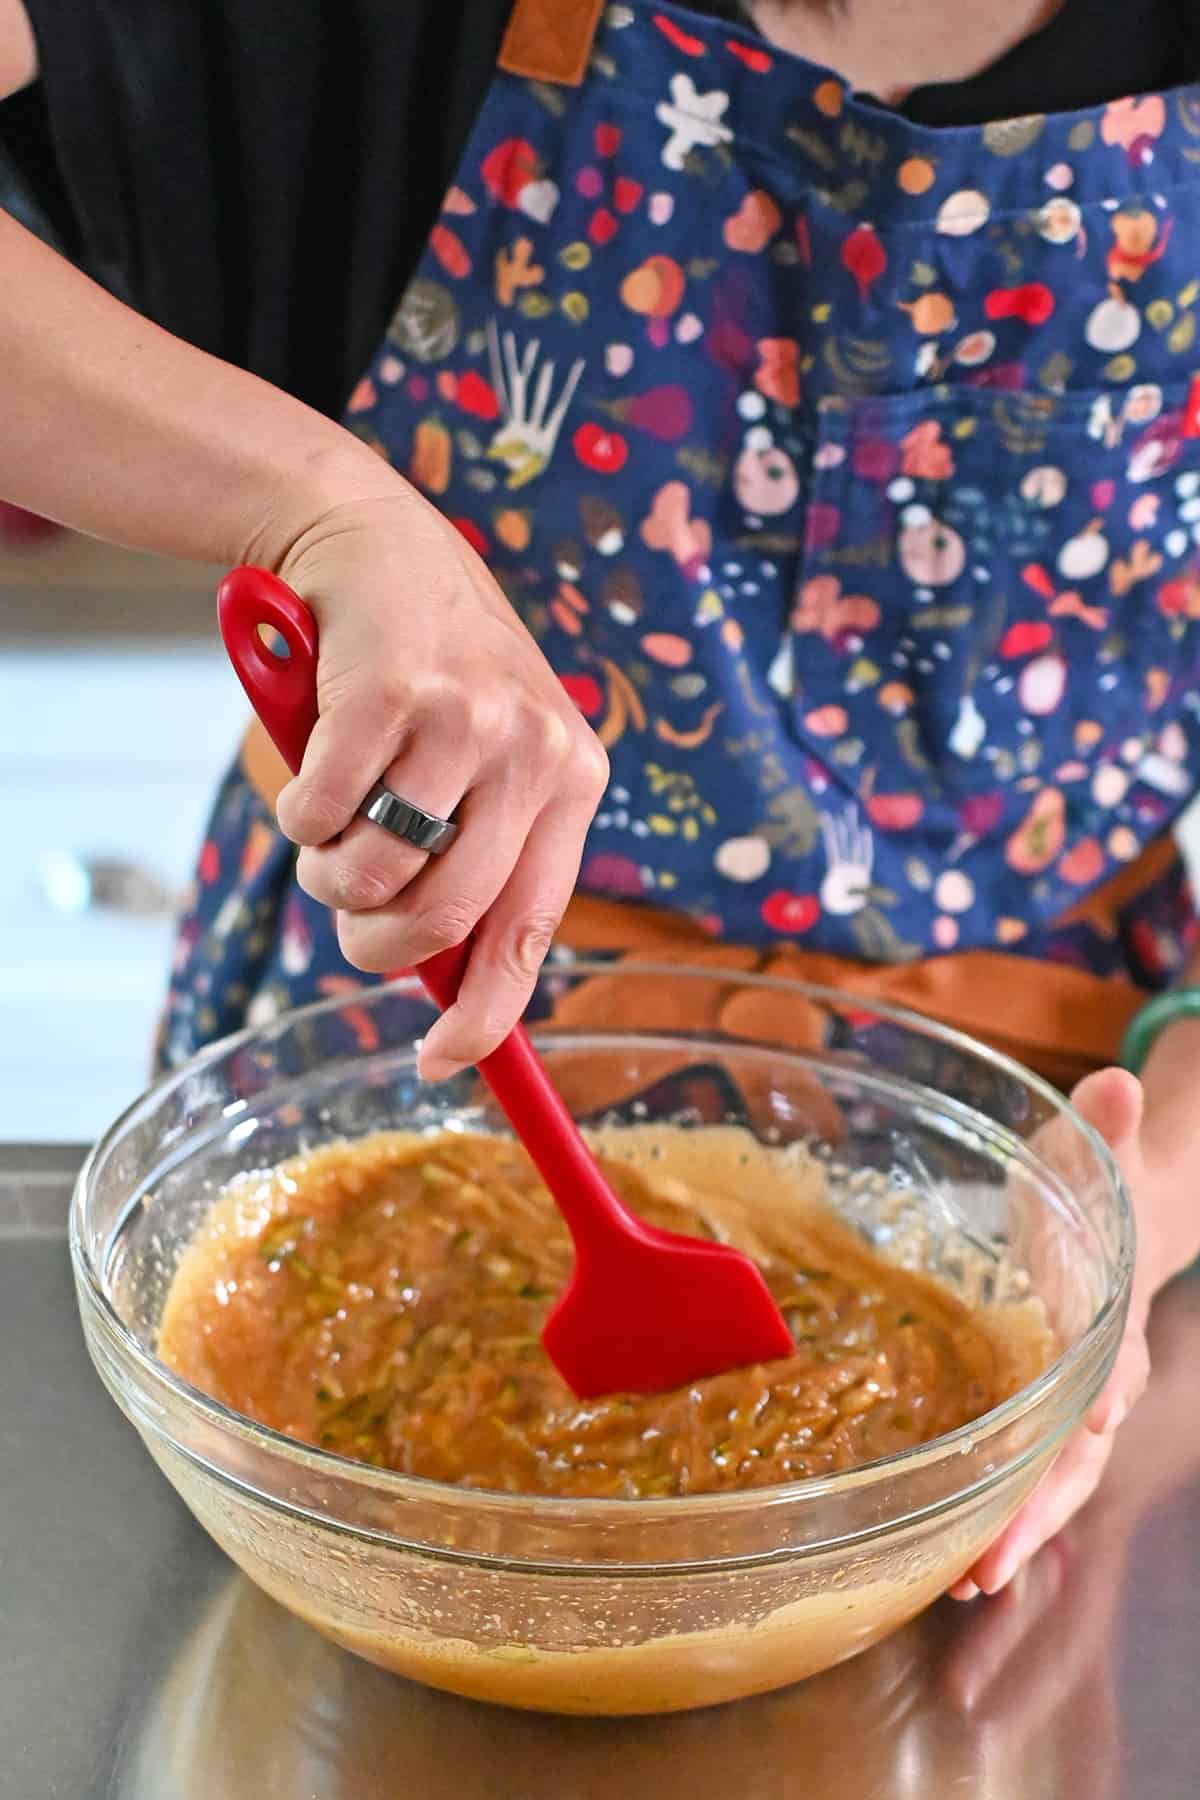 Stirring the shredded zucchini into the coconut sugar and egg mixture with a red silicone spatula.